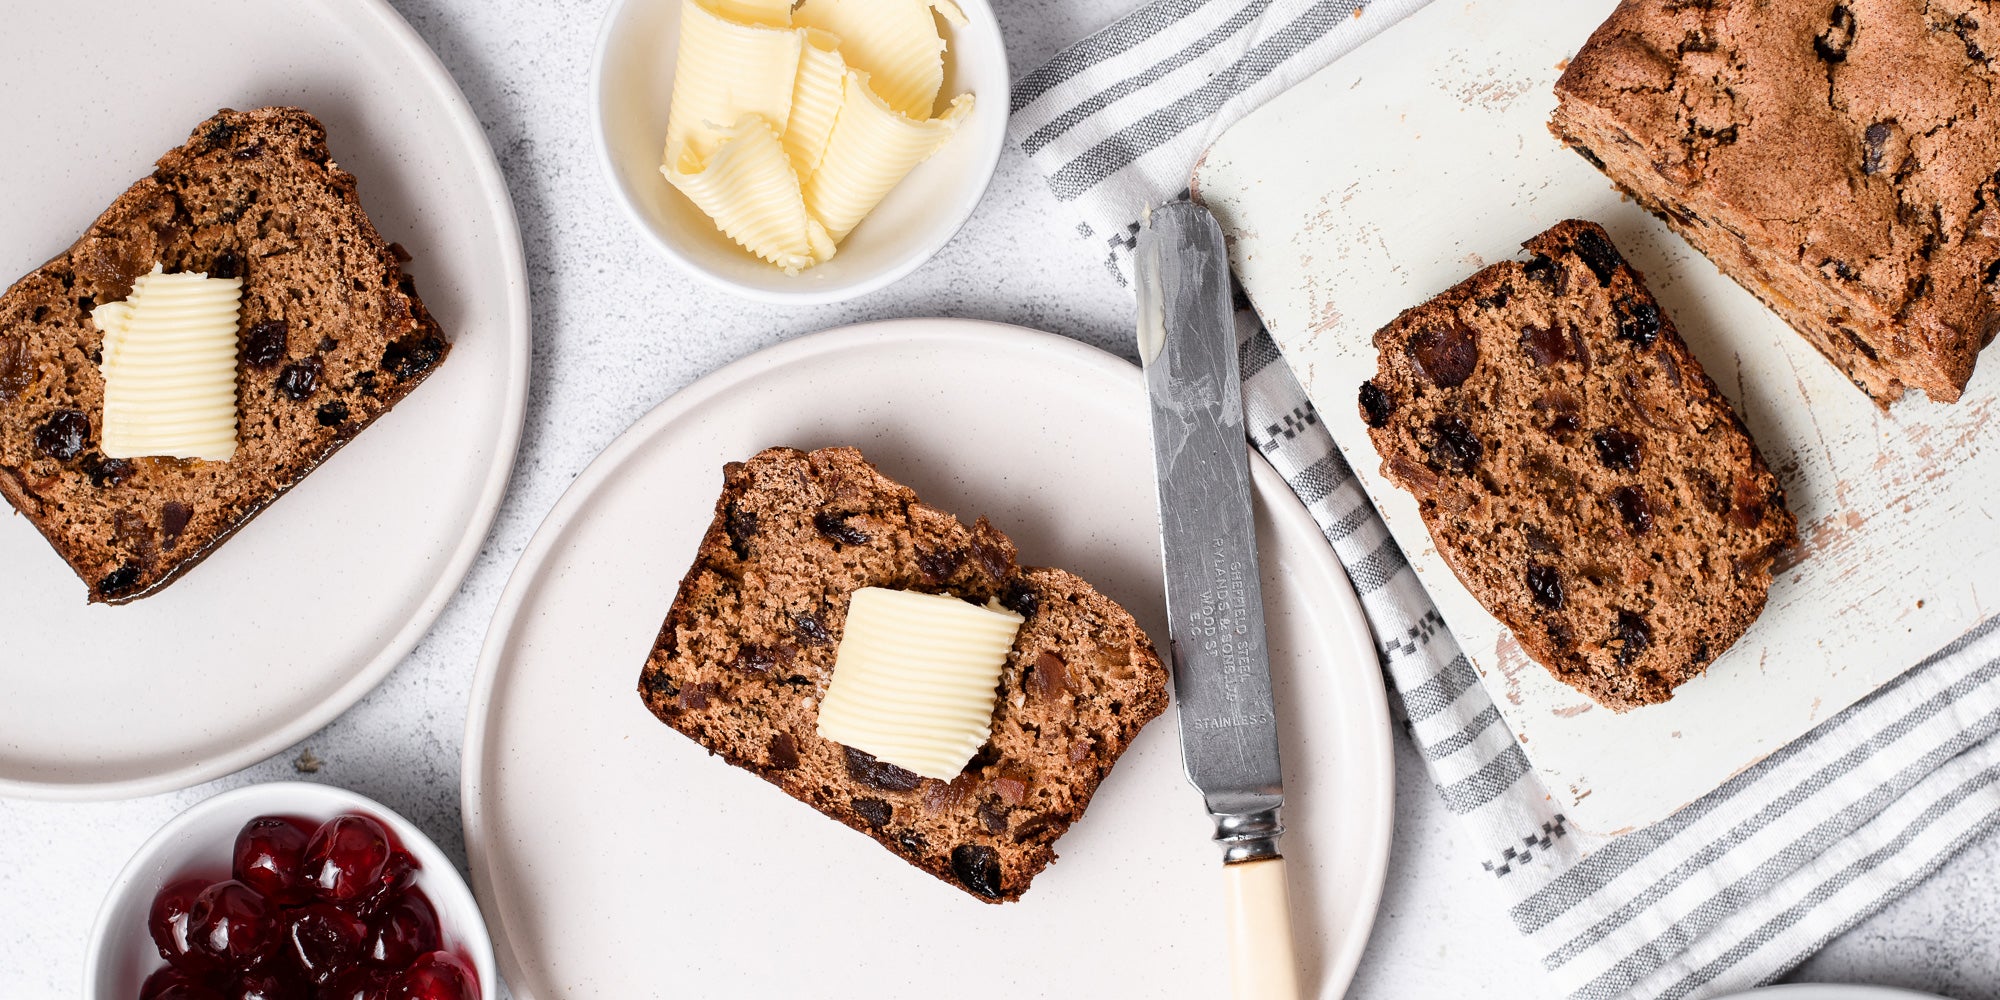 Irish Tea Brack sliced on plates with butter and preserves